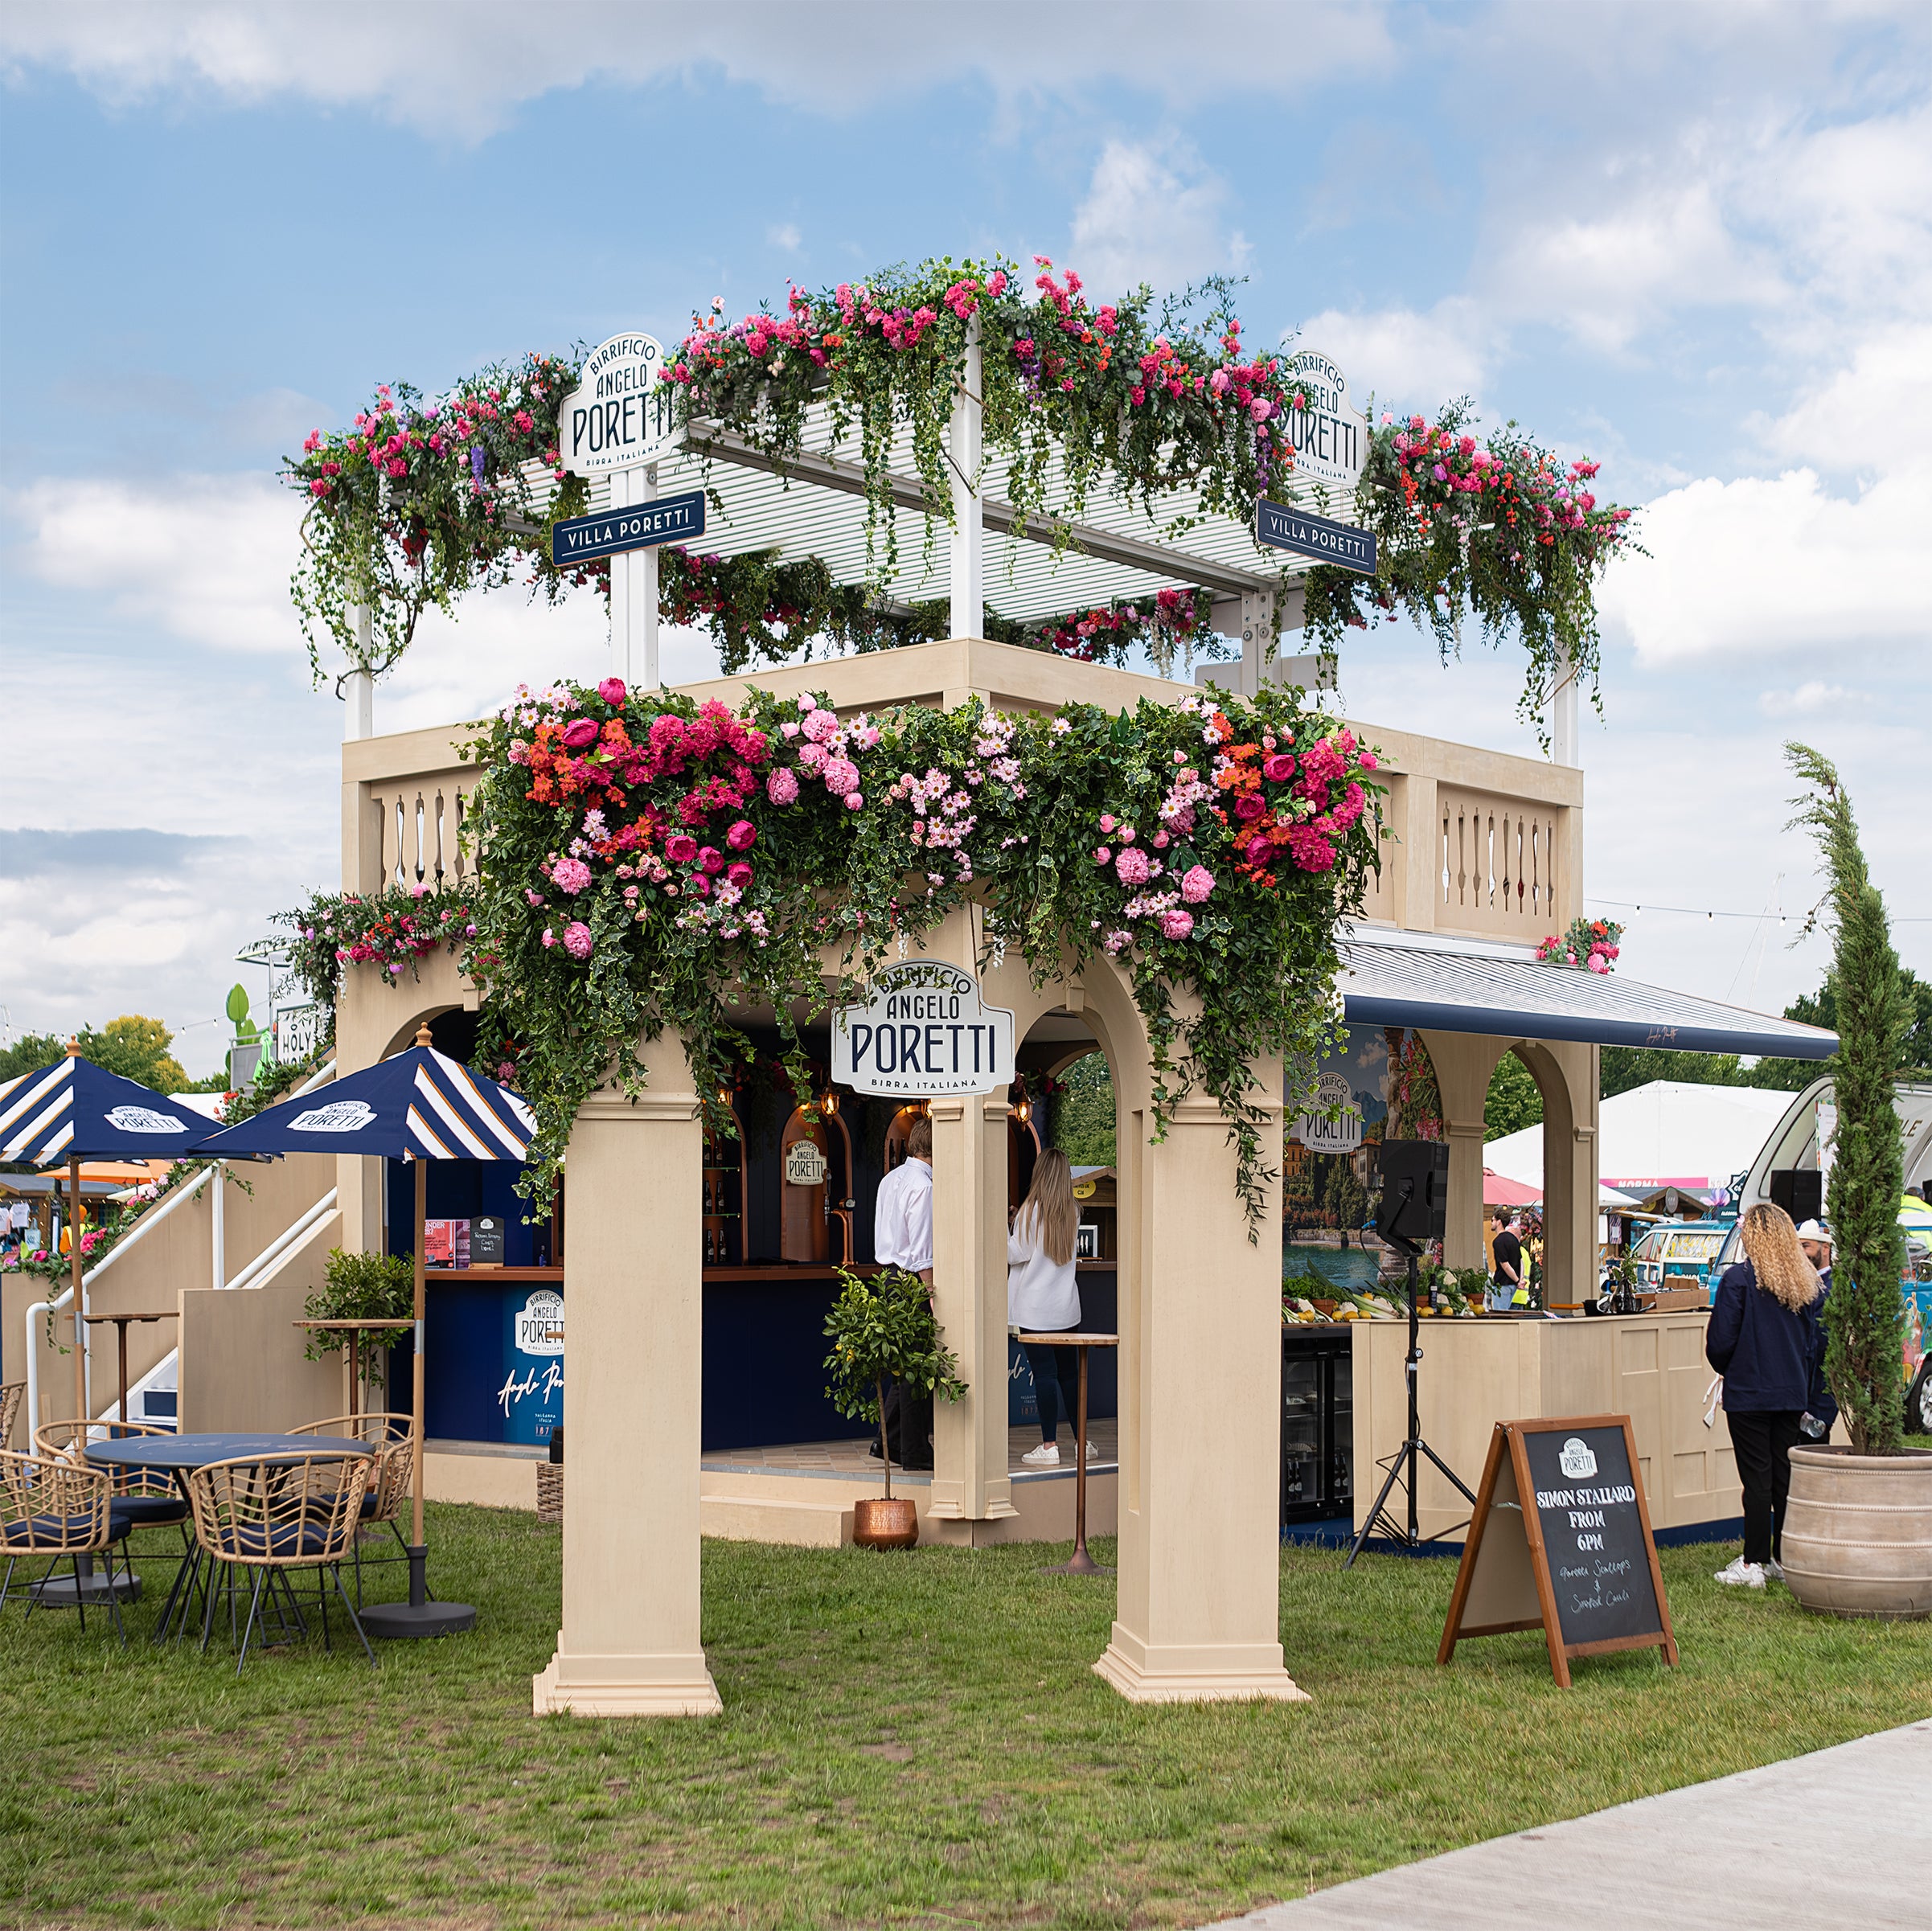 Angelo Poretti beer stand at Regent’s Park Taste Festival decorated by Event Florist Amaranté London. The archway is adorned with vibrant pink, red, and orange flowers and lush green foliage. Blue awnings and wicker chairs enhance the Mediterranean ambiance. An exquisite example of Amaranté London’s event floristry.